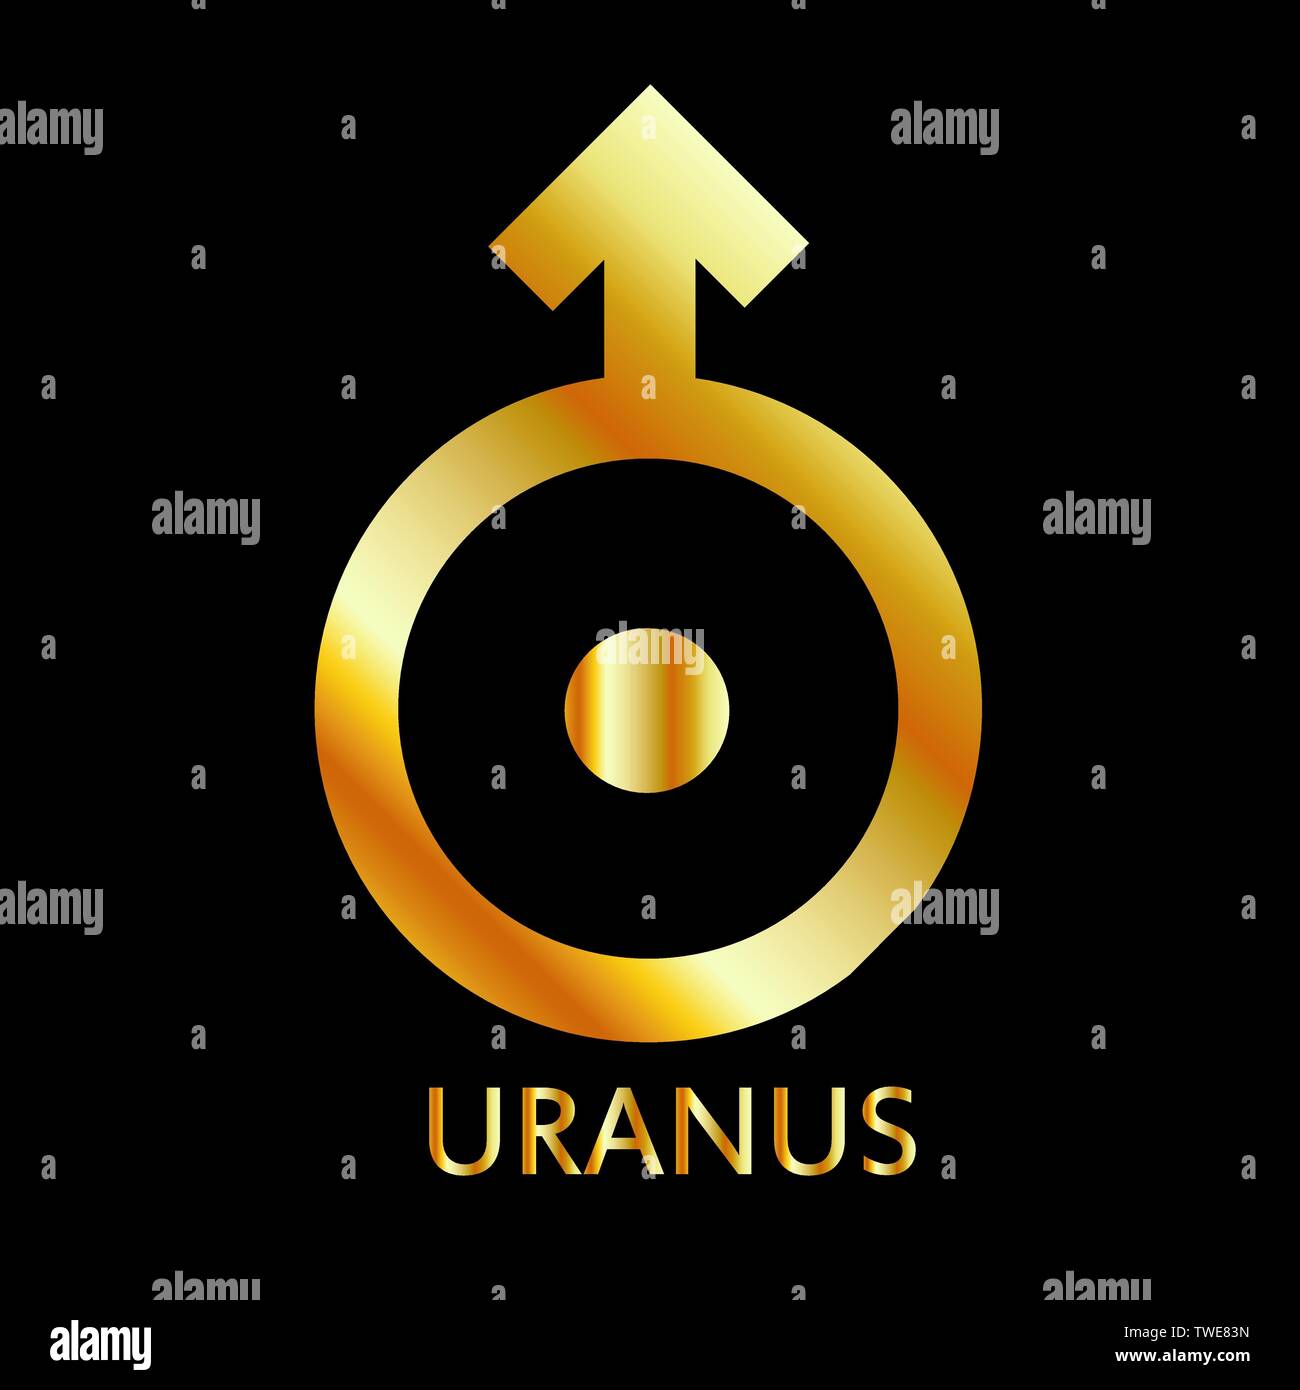 Zodiac and astrology symbol of the planet Uranus in gold colors- astronomical icon Stock Vector